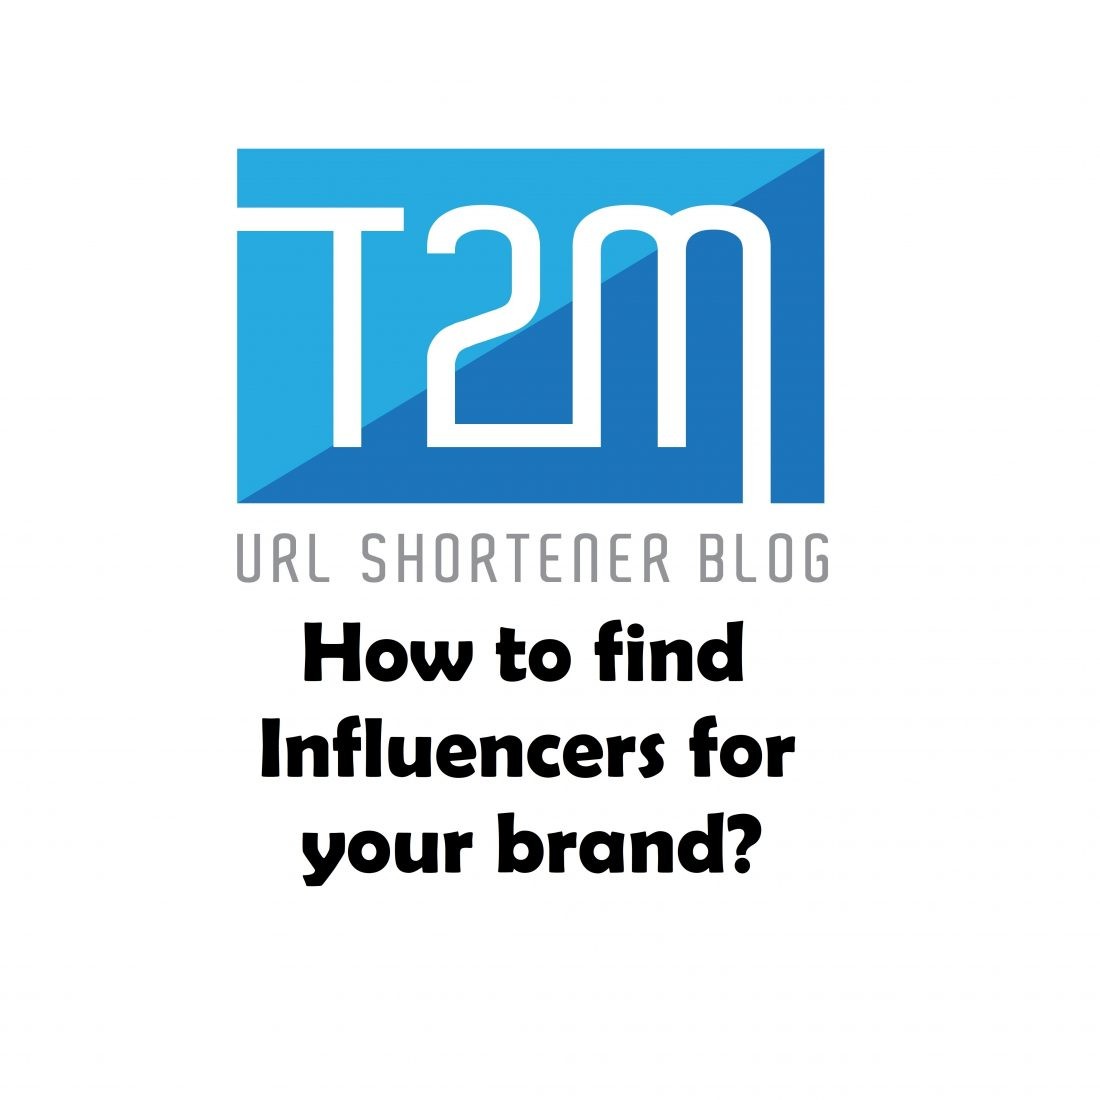 How to find Influencers for your brand?